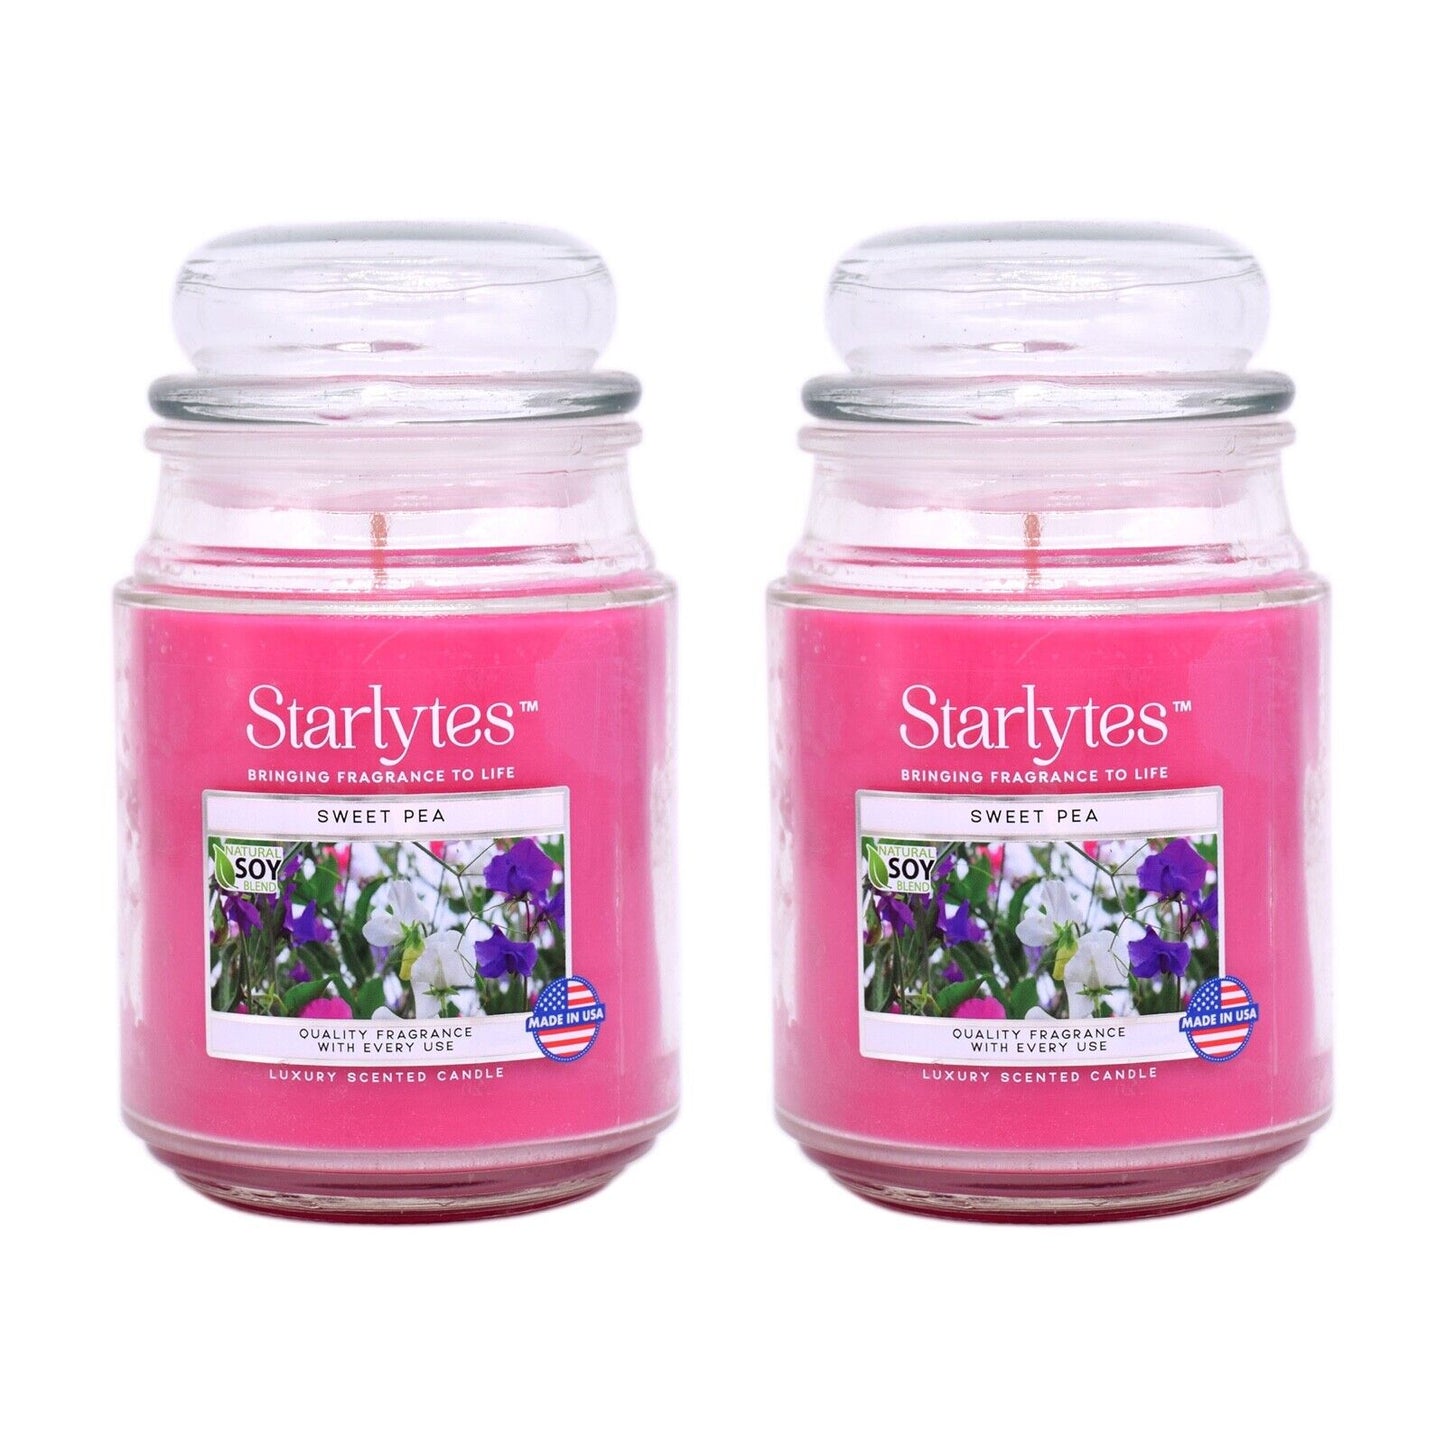 2x Starlytes Sweet Pea Luxury Scented Candle 510g 125hr Burn Time